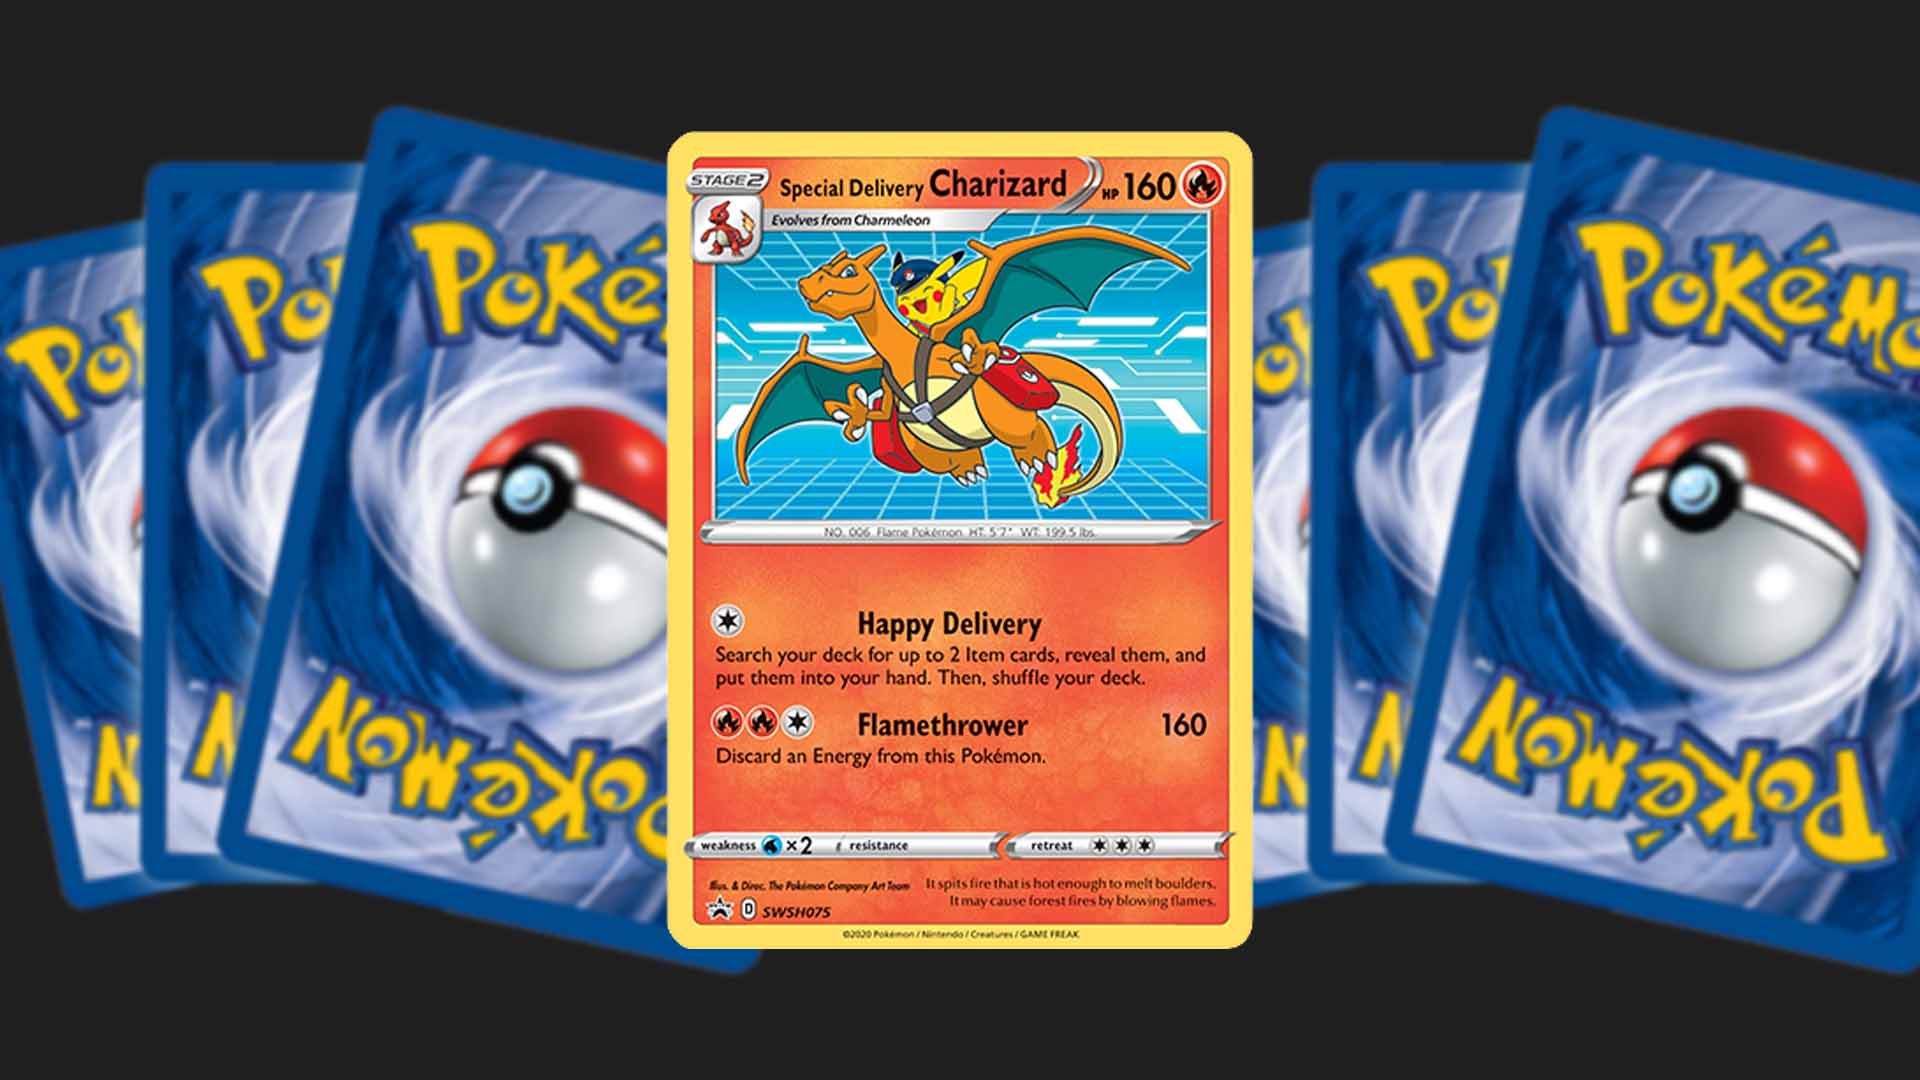 Old pokemon cards i'm interested in knowing the value of. Especially  interested in this charizard costume pikachu from the pokemon center in  2015. Someone enlighten me please :) Can supply better quality/more